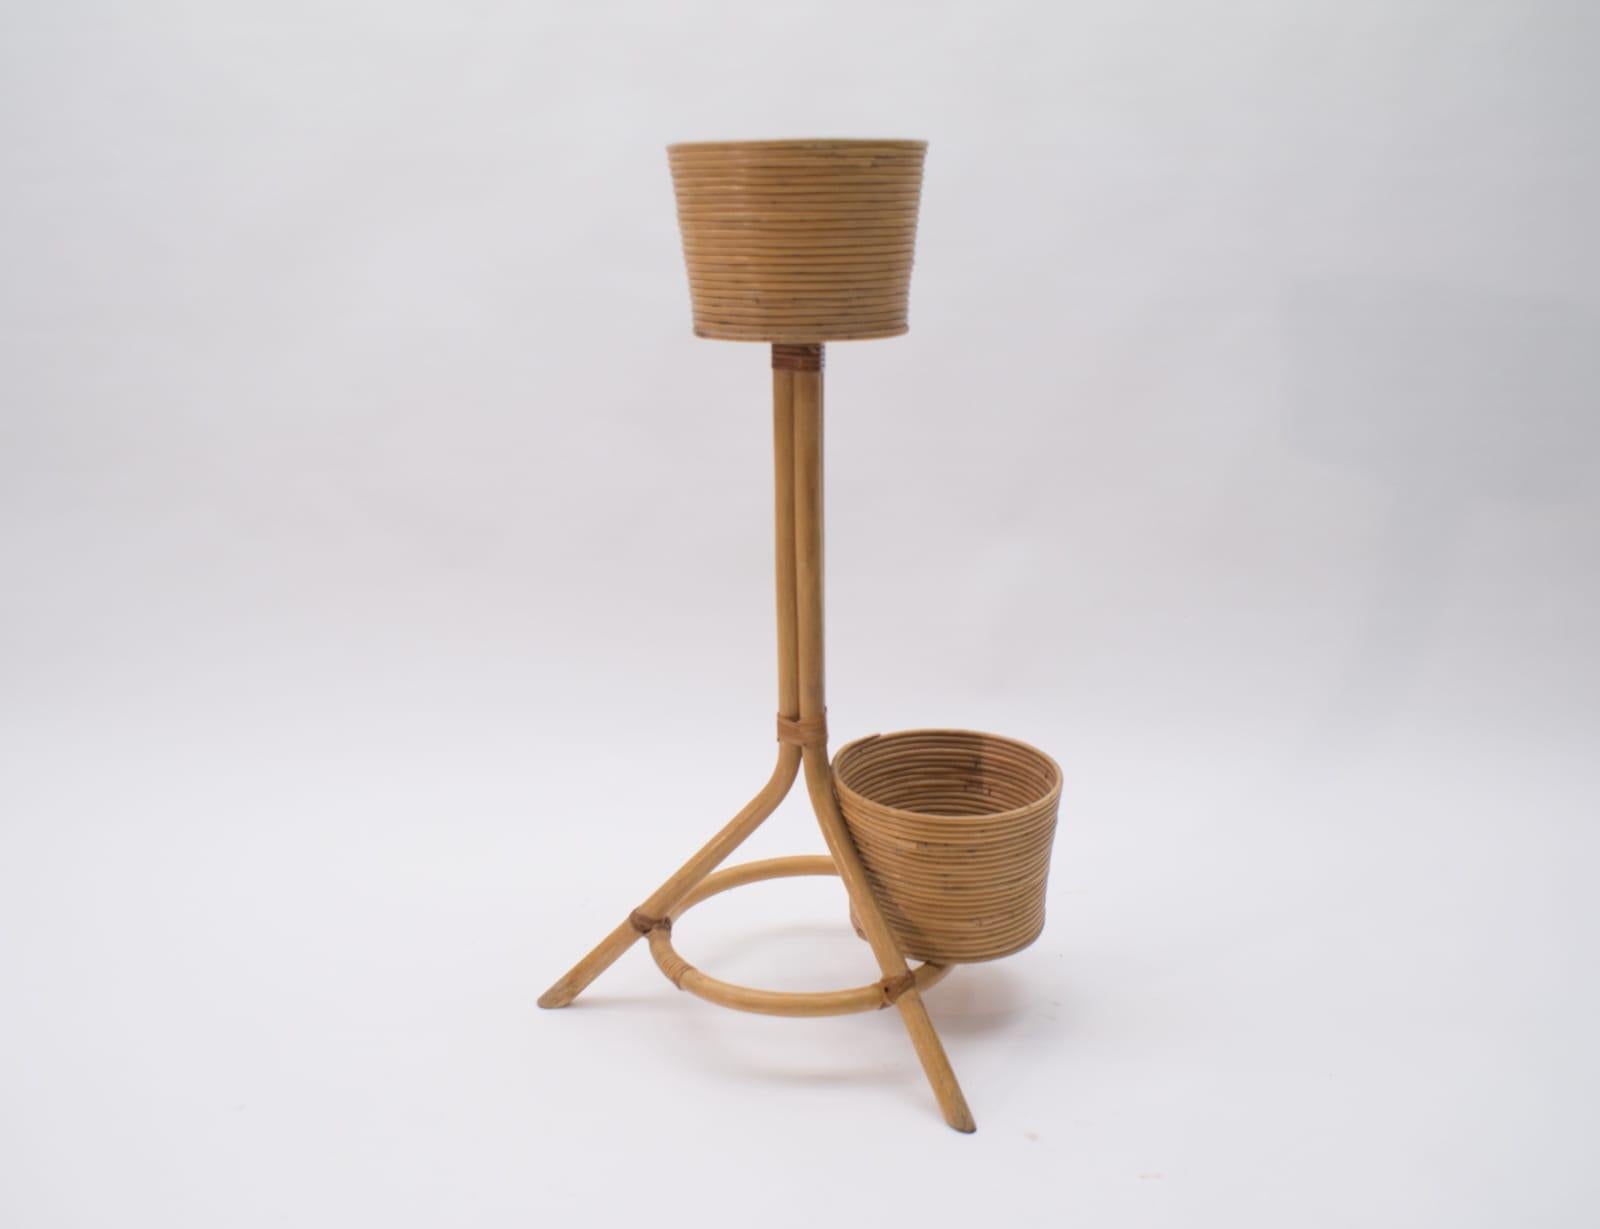 Mid-Century Modern Italian Bamboo and Rattan Flower Stand or Plant Holder, 1950s For Sale